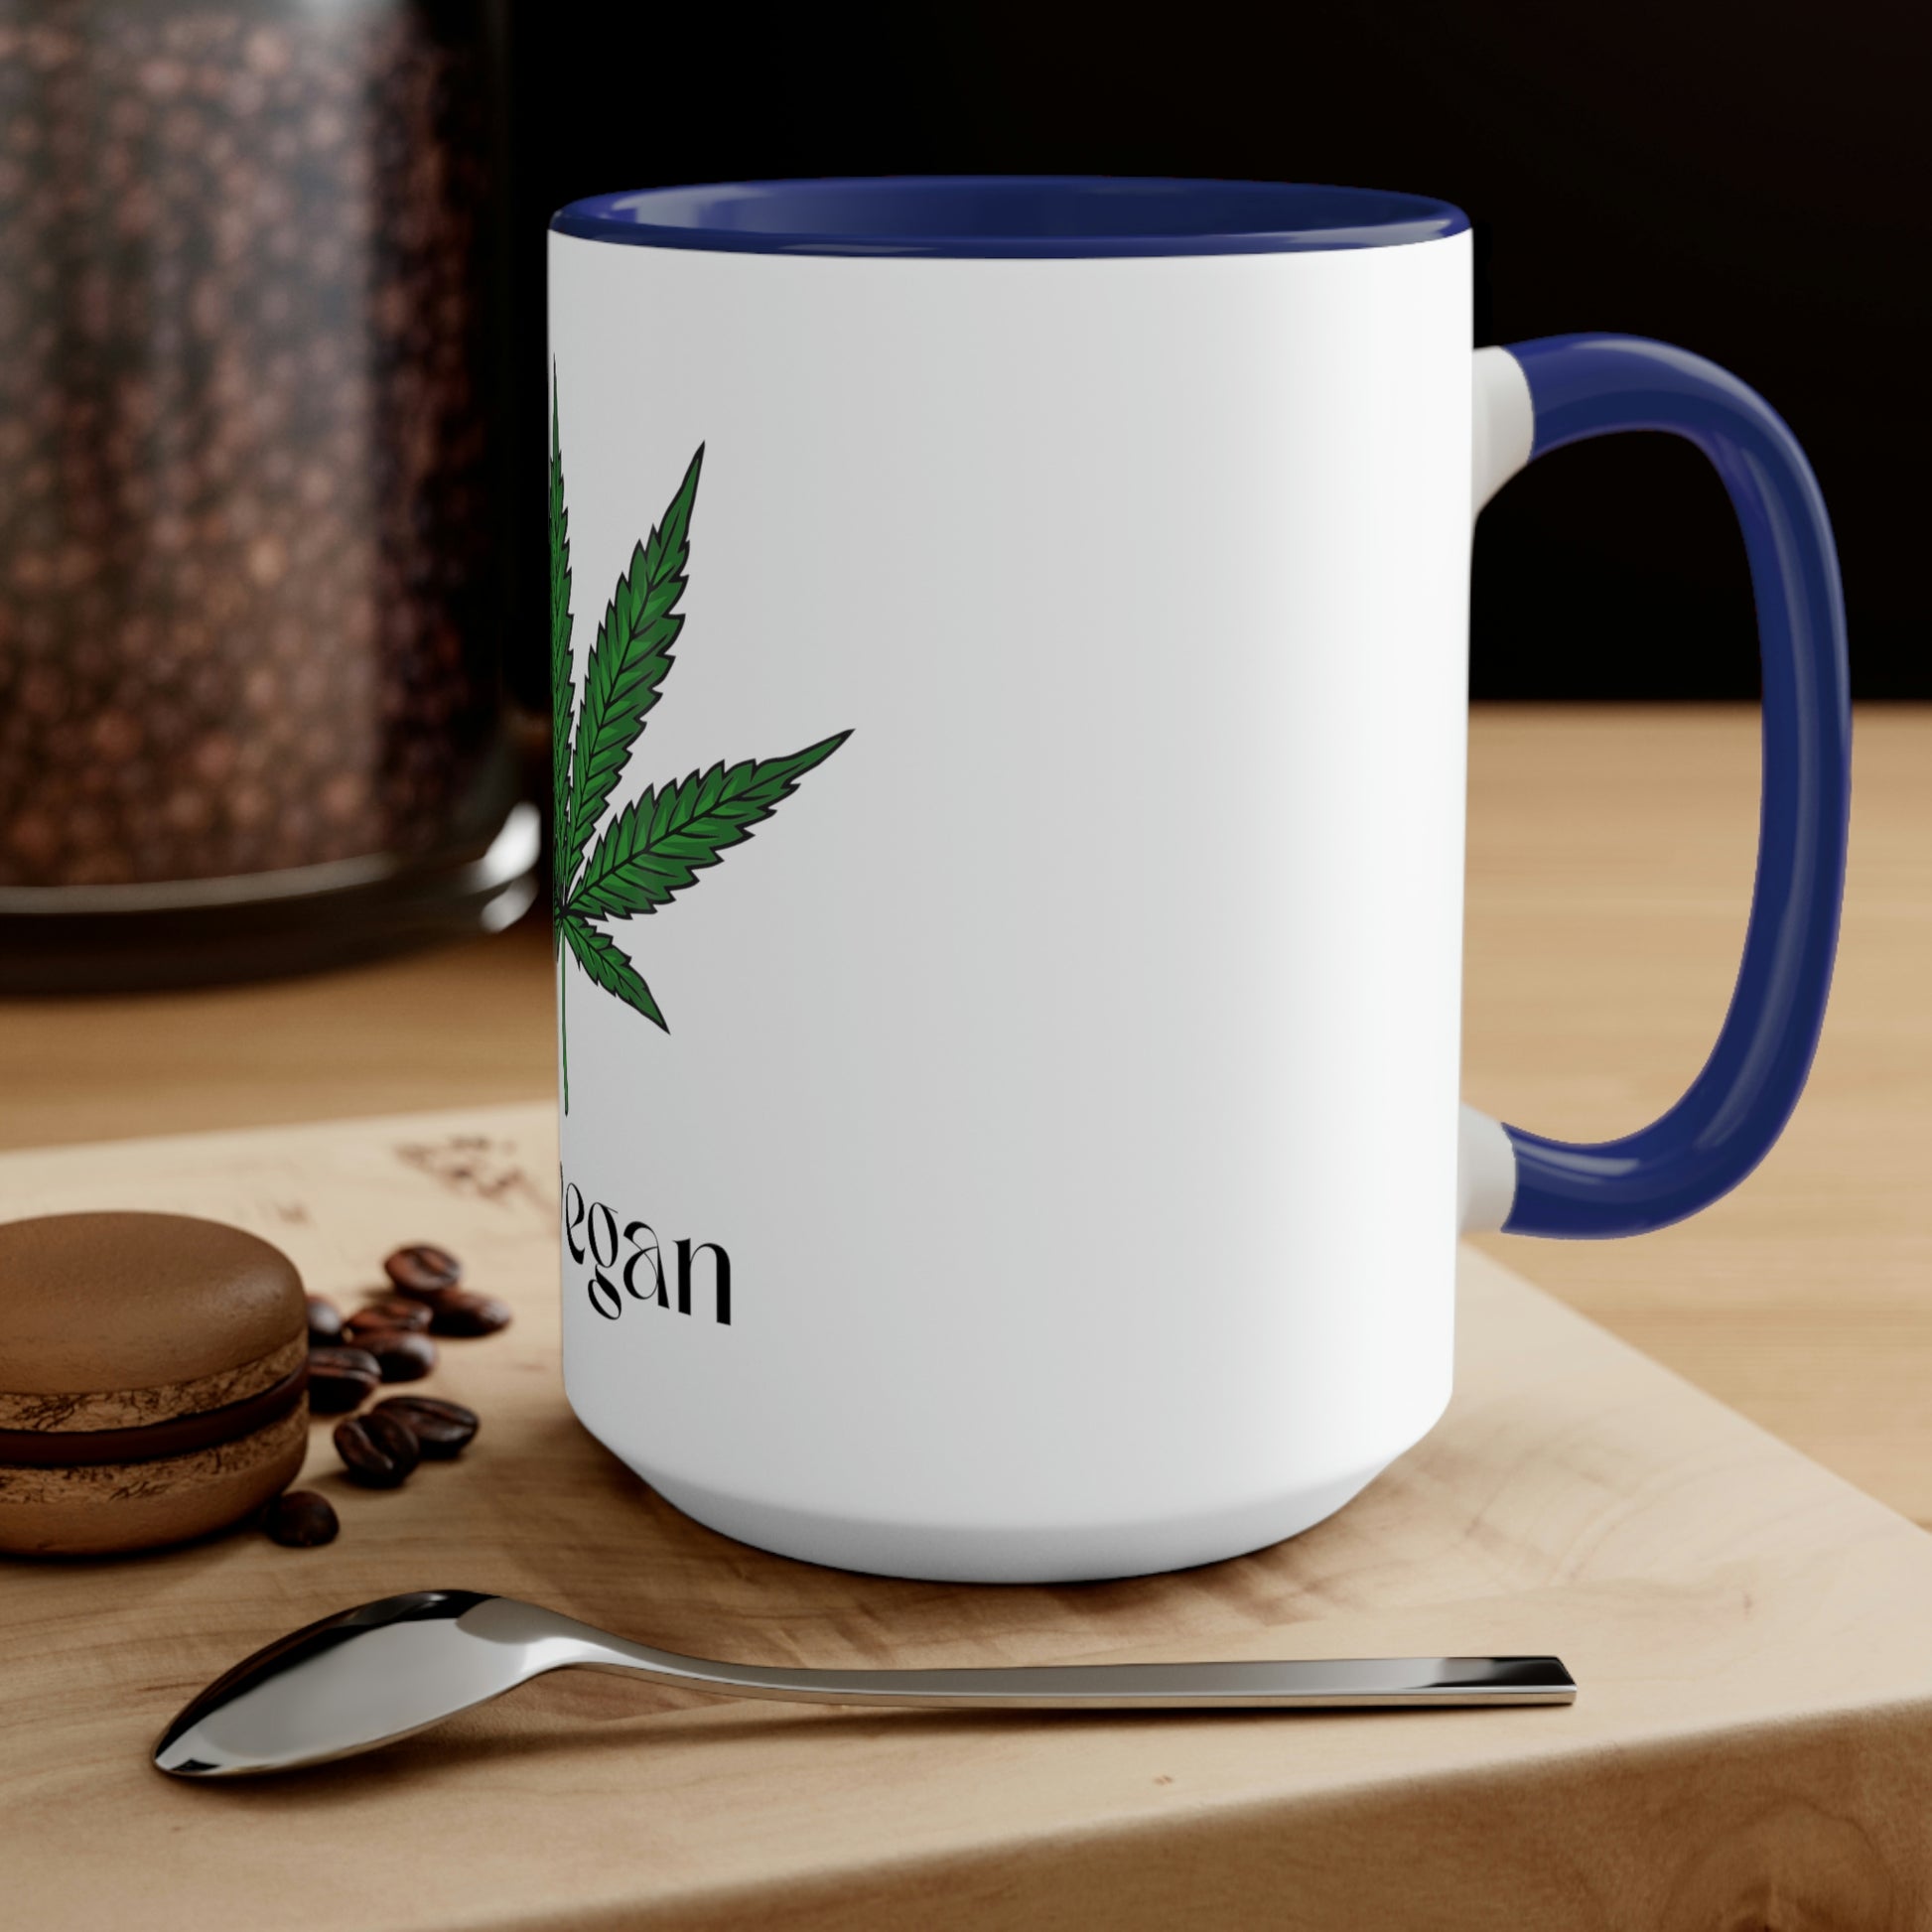 A white and navy "I'm Vegan" cannabis coffee mug on a wooden table with a spoon and a macaroon